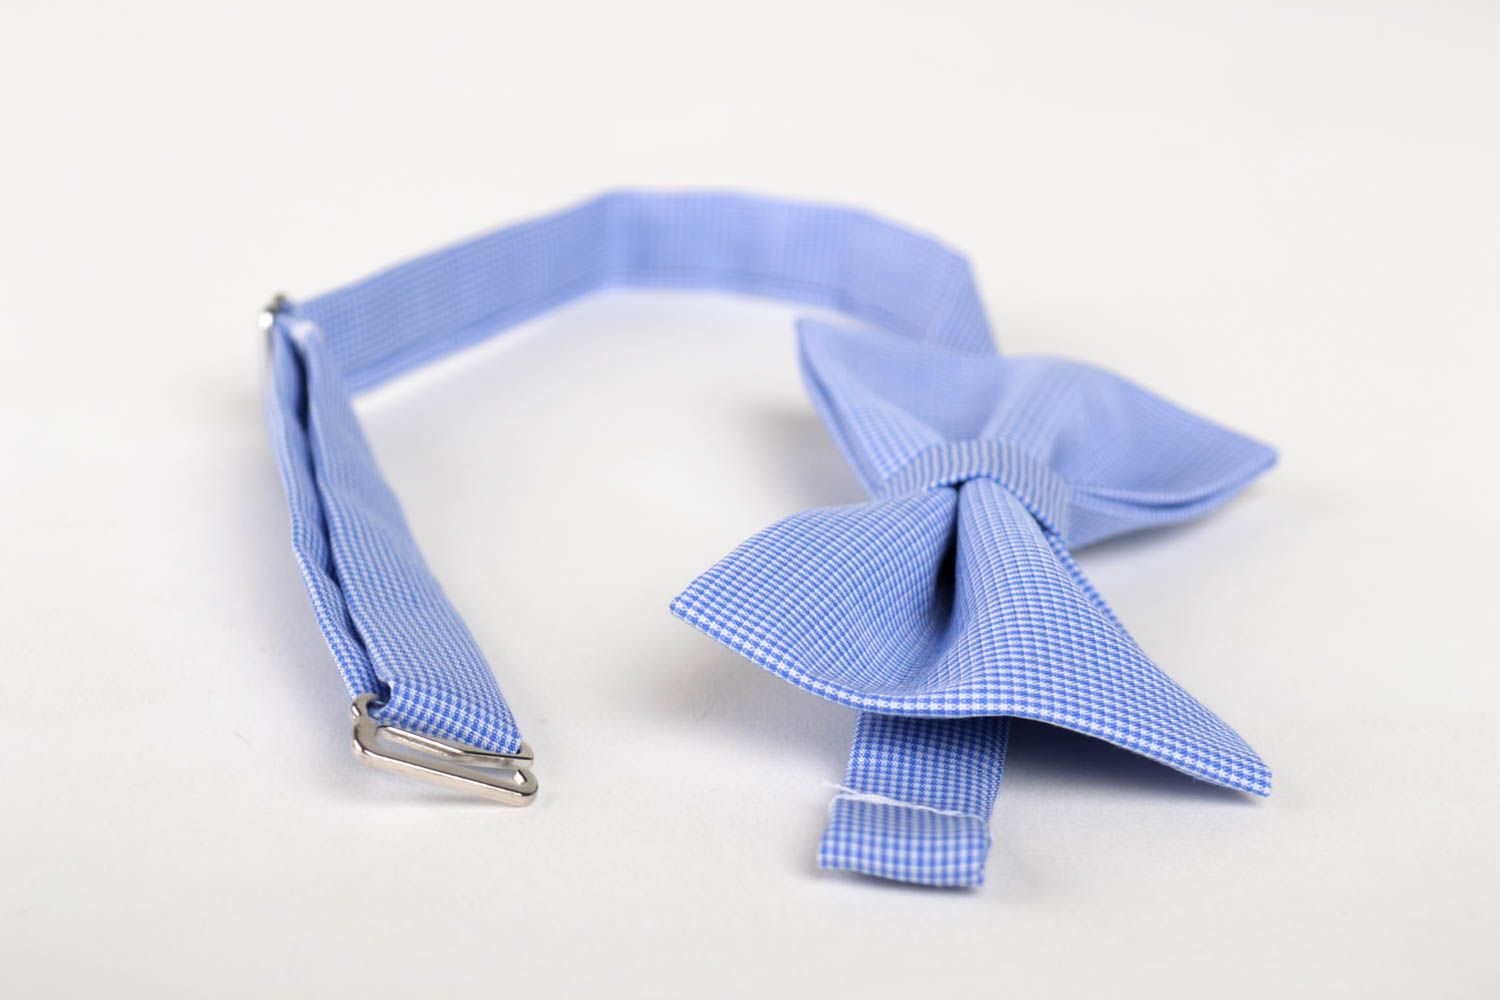 Handmade accessories for men stylish cute bow tie unusual blue bow tie photo 3